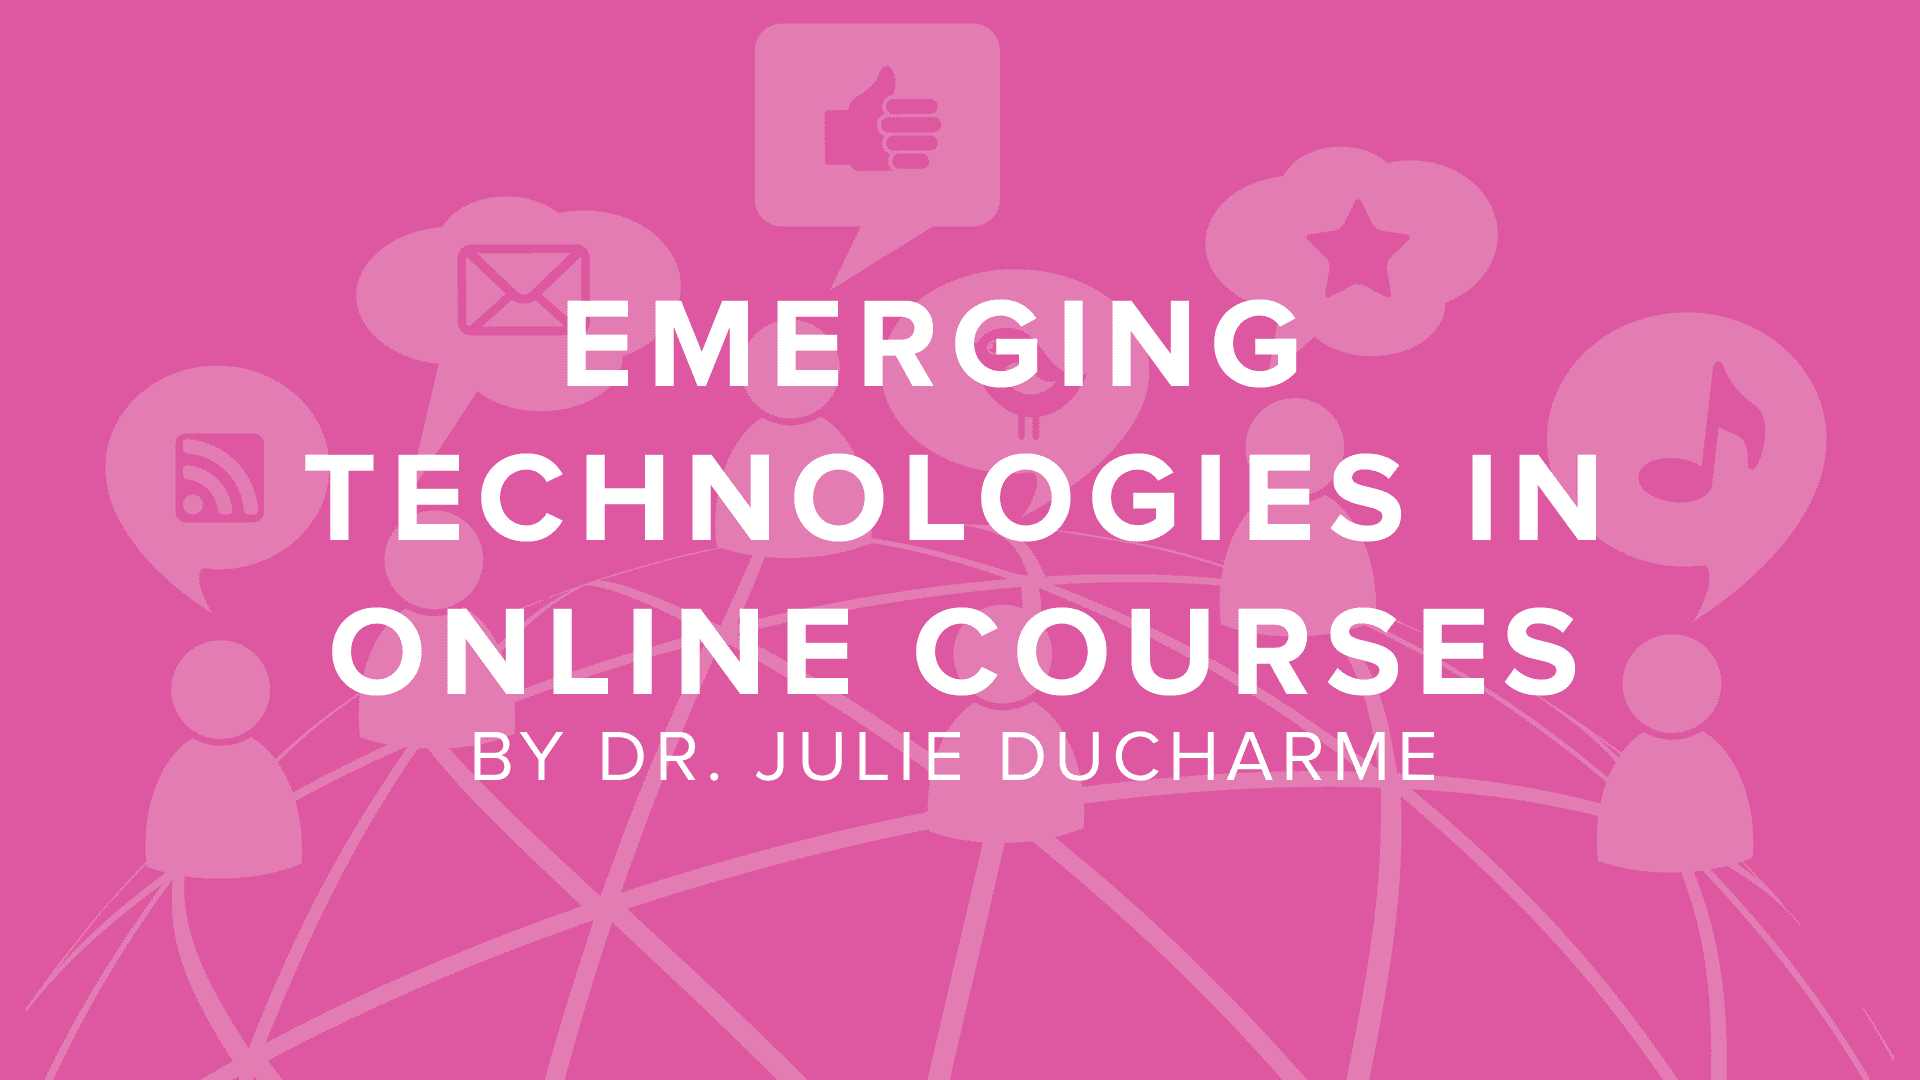 DigitalChalk: Creating Successful Online Courses with Emerging Technologies by Dr. Julie Ducharme